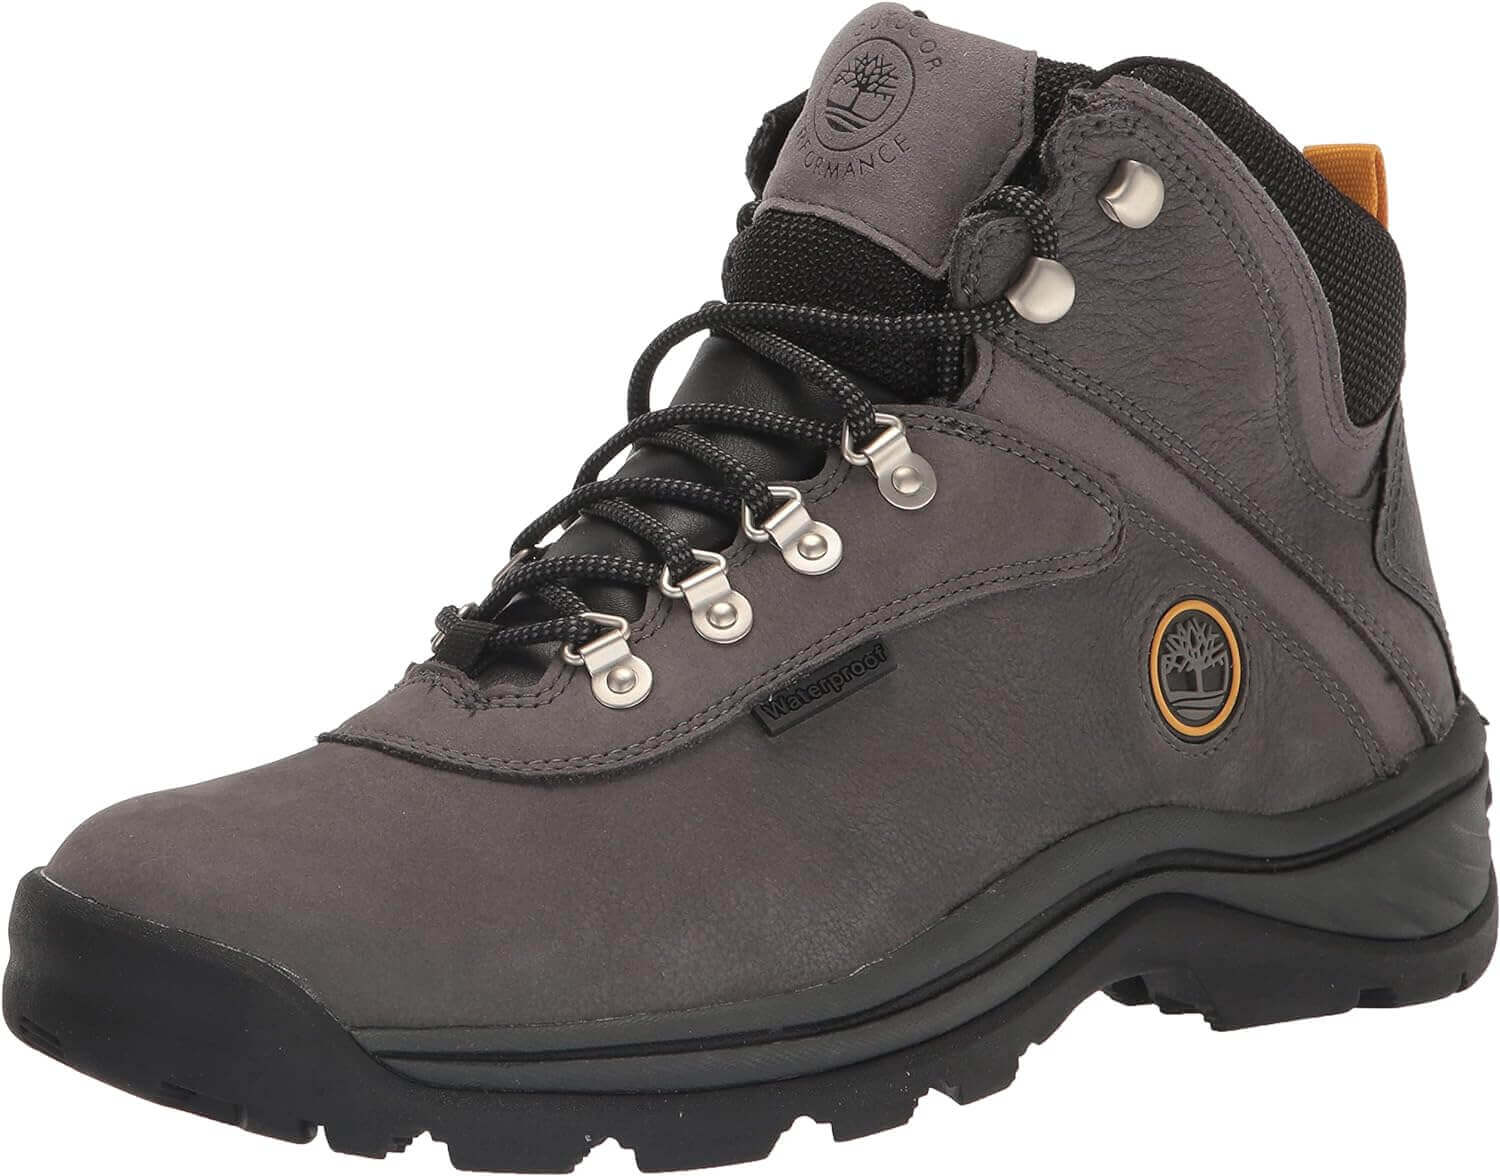 Shop The Latest >Men's White Ledge Mid Waterproof Hiking Boot > *Only $121.49*> From The Top Brand > *Timberlandl* > Shop Now and Get Free Shipping On Orders Over $45.00 >*Shop Earth Foot*